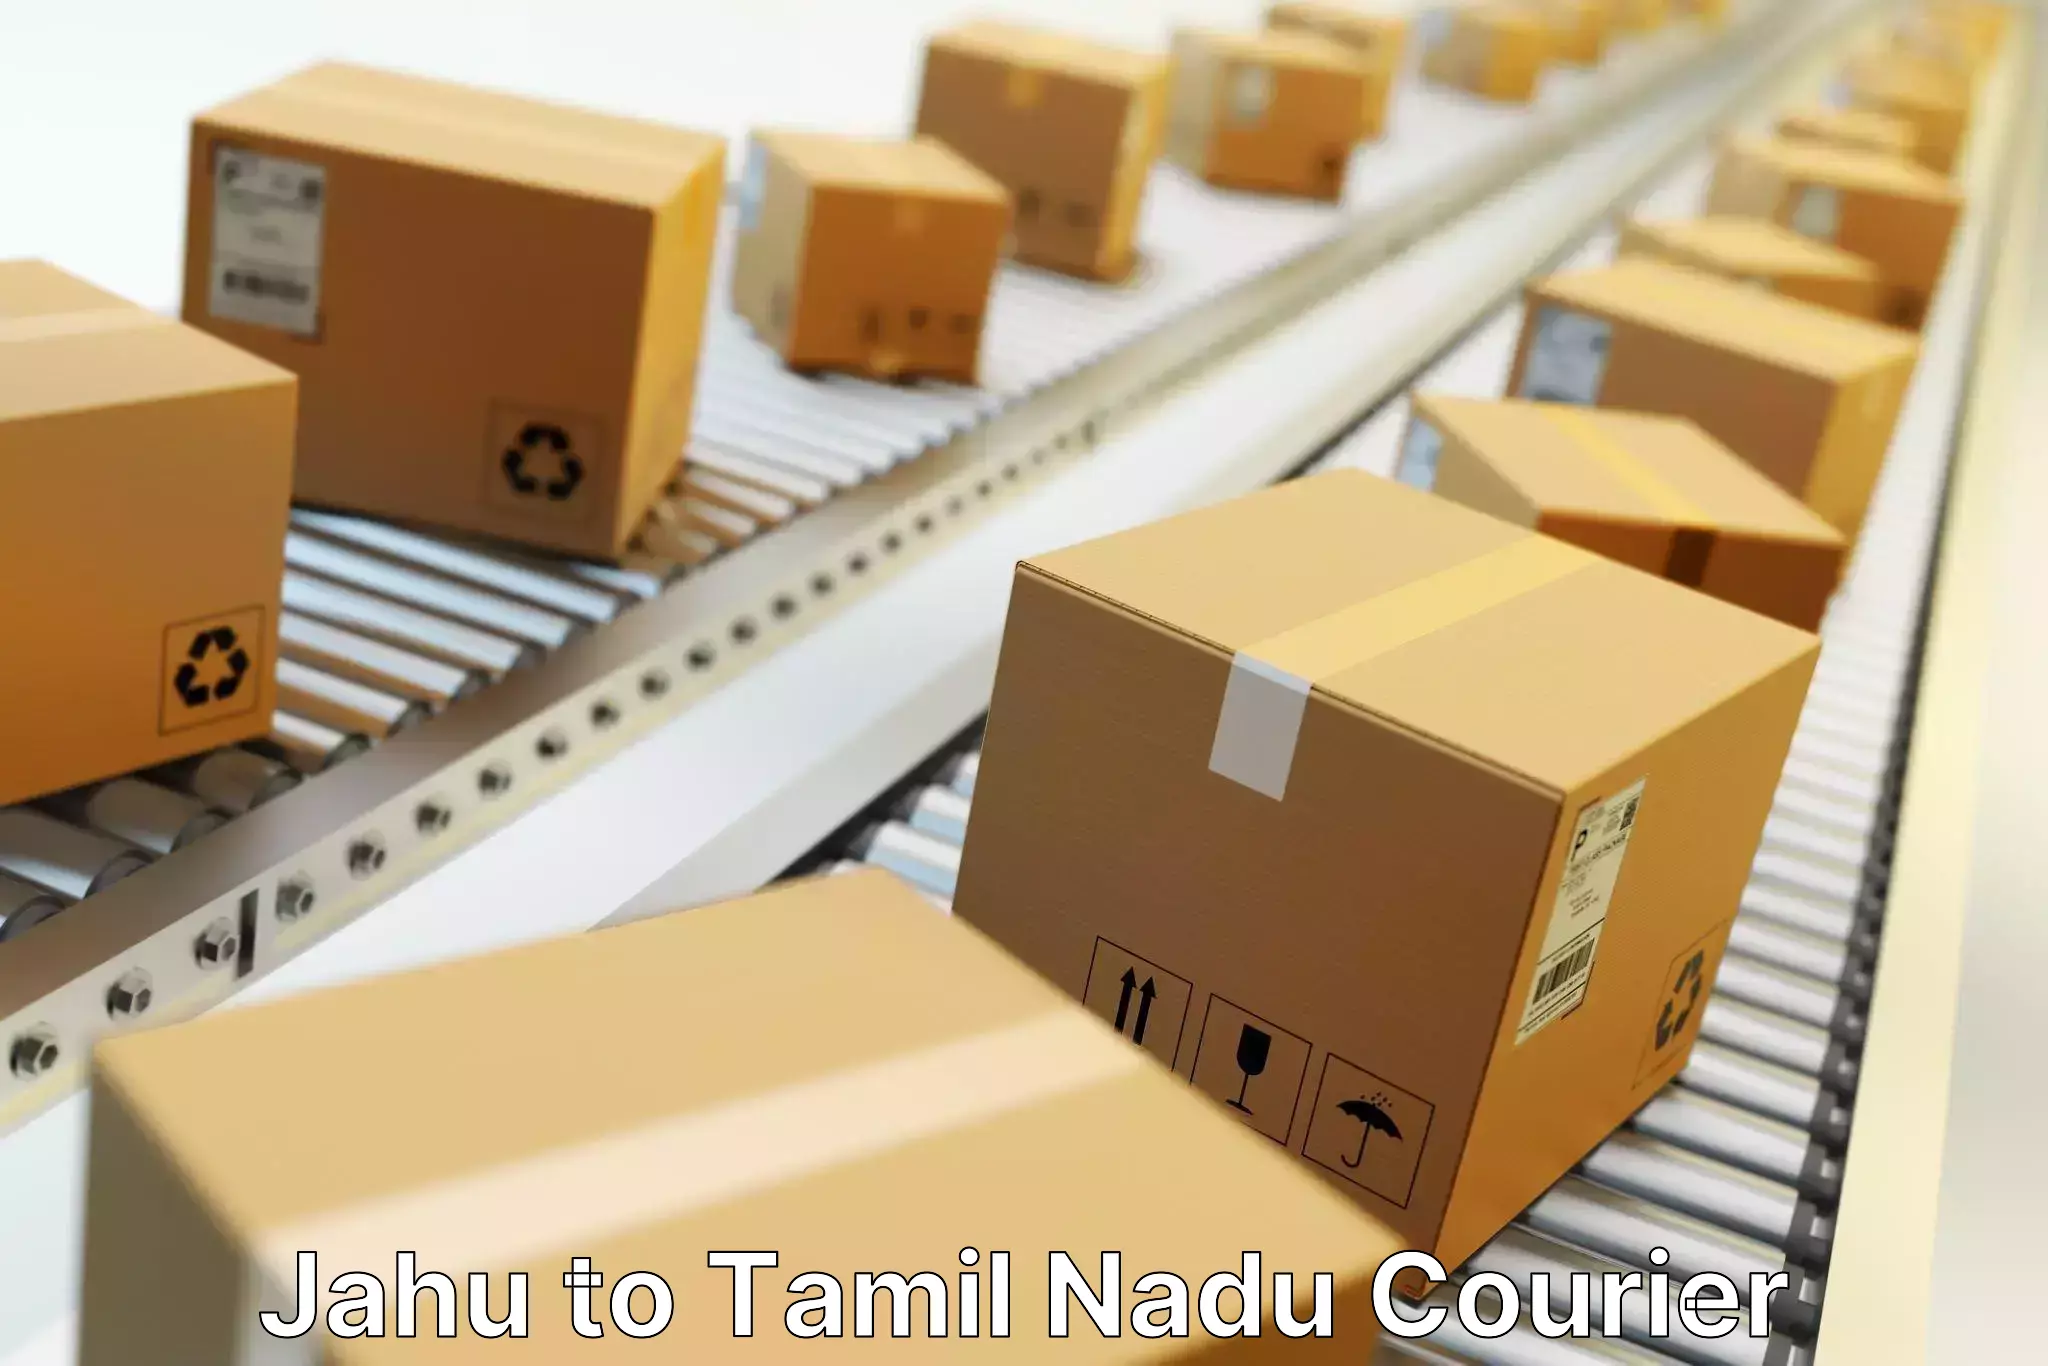 International courier networks Jahu to Ennore Port Chennai